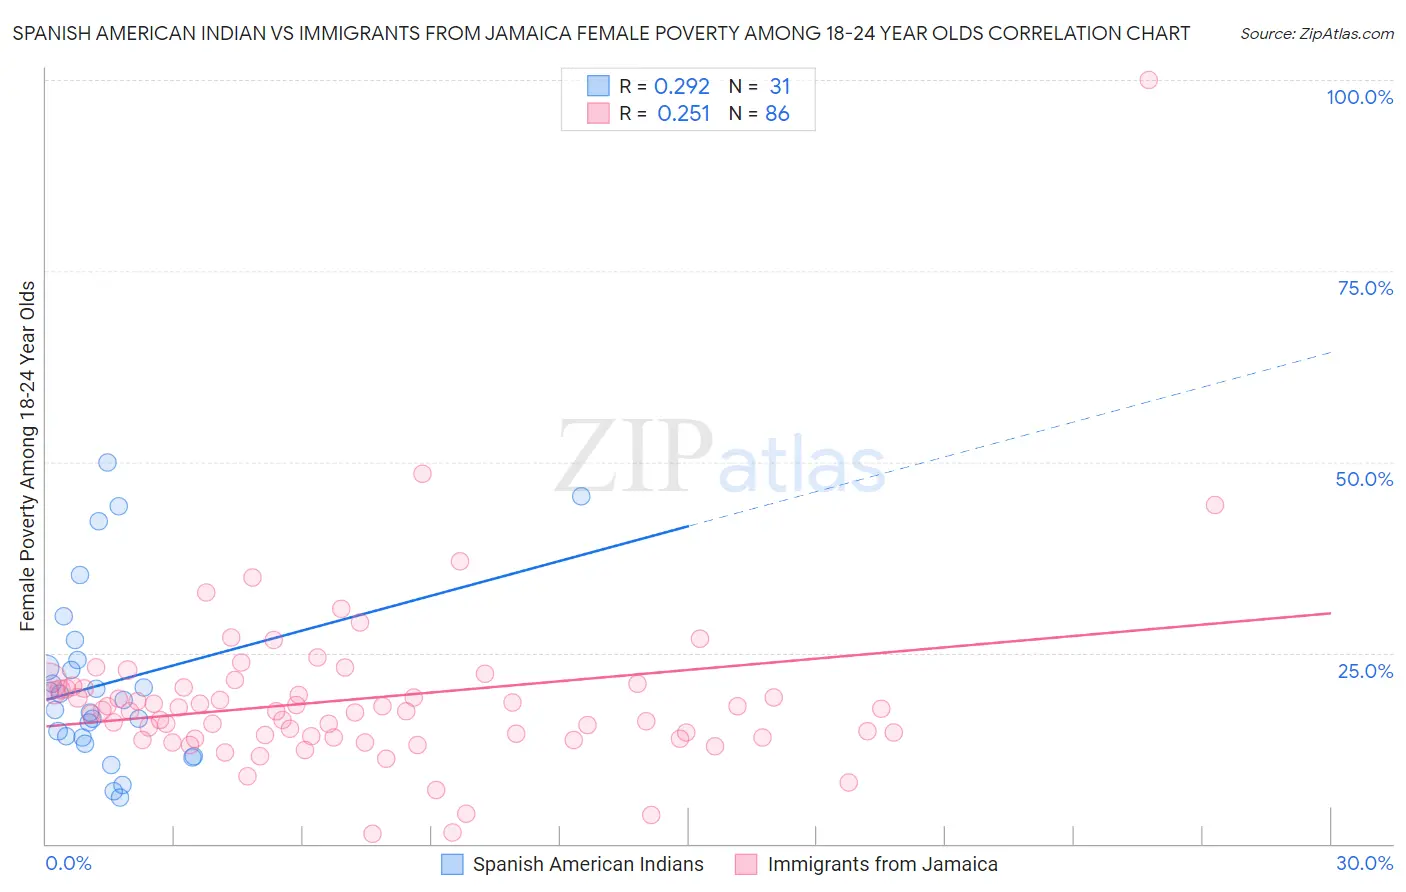 Spanish American Indian vs Immigrants from Jamaica Female Poverty Among 18-24 Year Olds